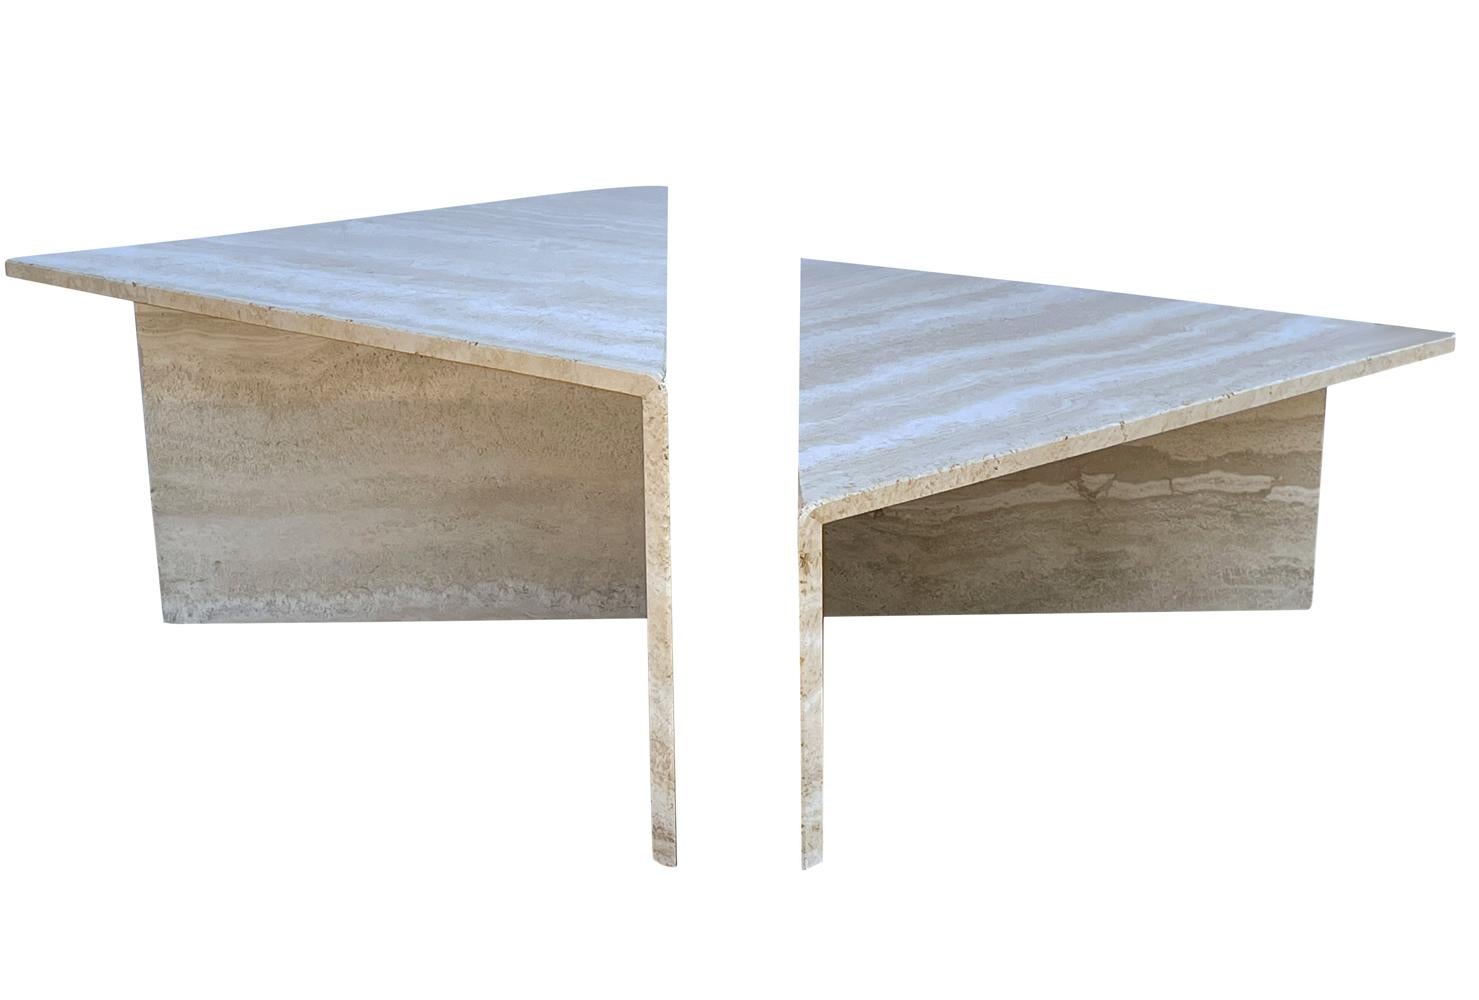 Two piece contemporary design circa 1990s from Italy. Solid travertine construction. Each table measures 55 inches from corner to corner. 27.5 inches wide. The taller table is 16 inches tall and the shorter table is 12 inches tall.